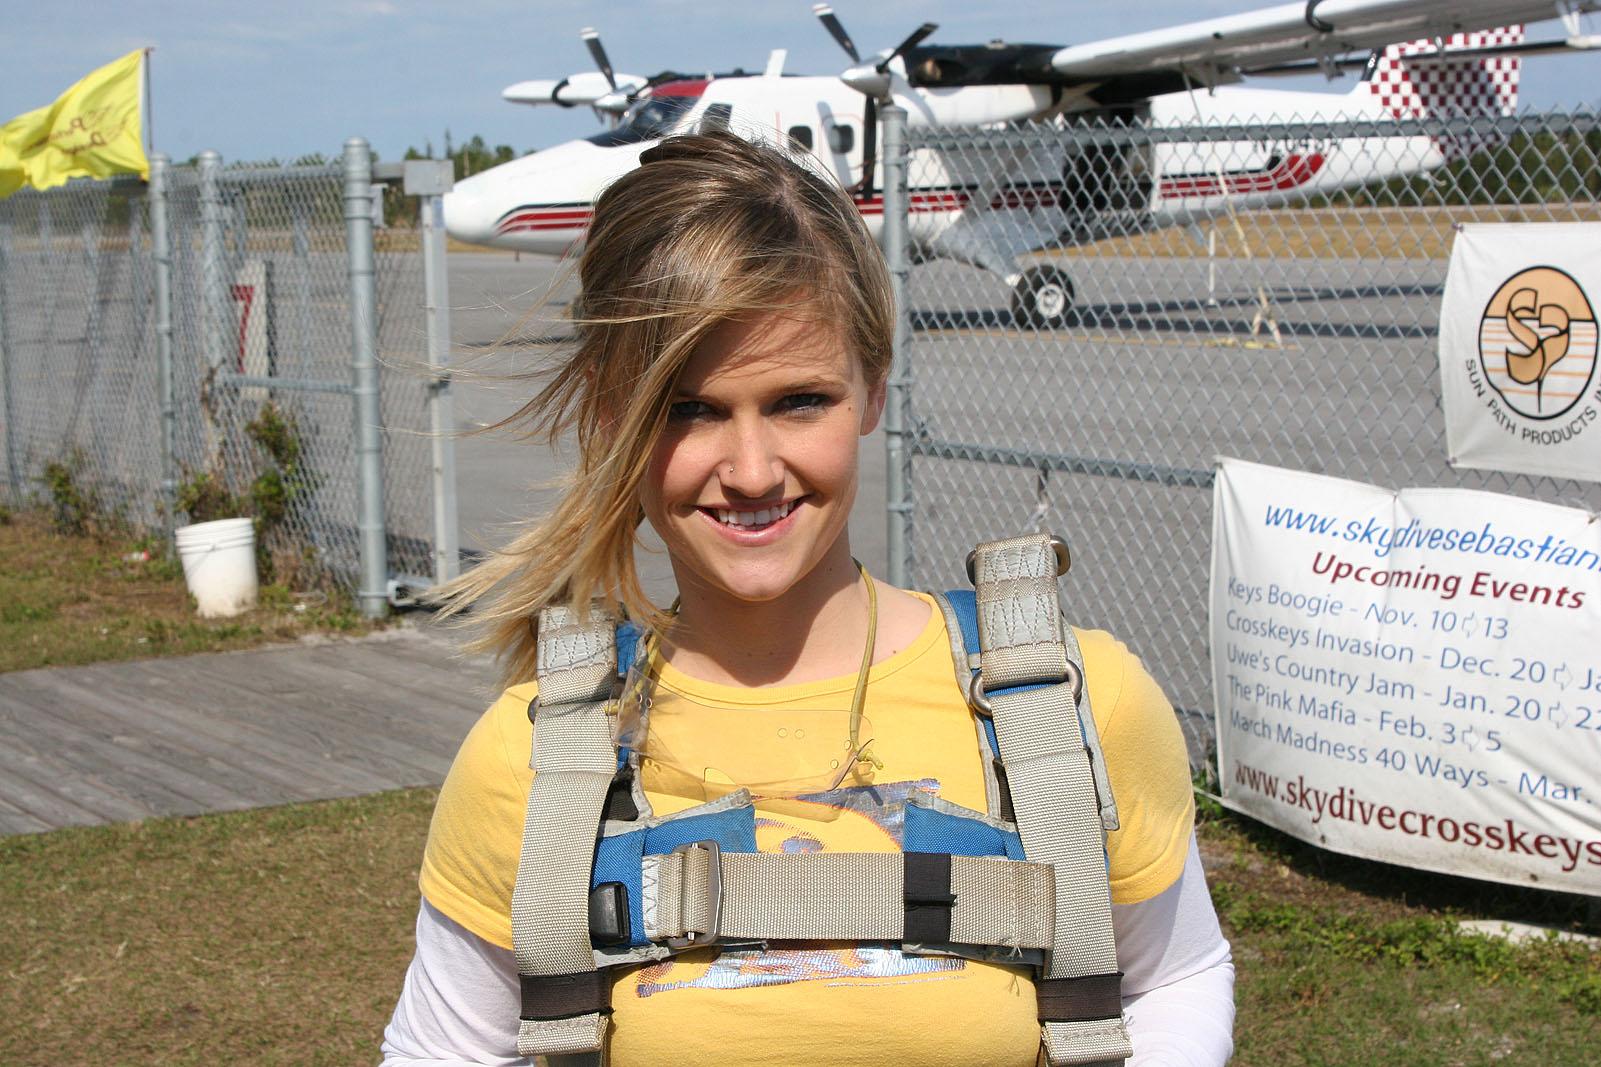 Pictures of Samantha Gauge and Brooke Skye going sky diving #53558030